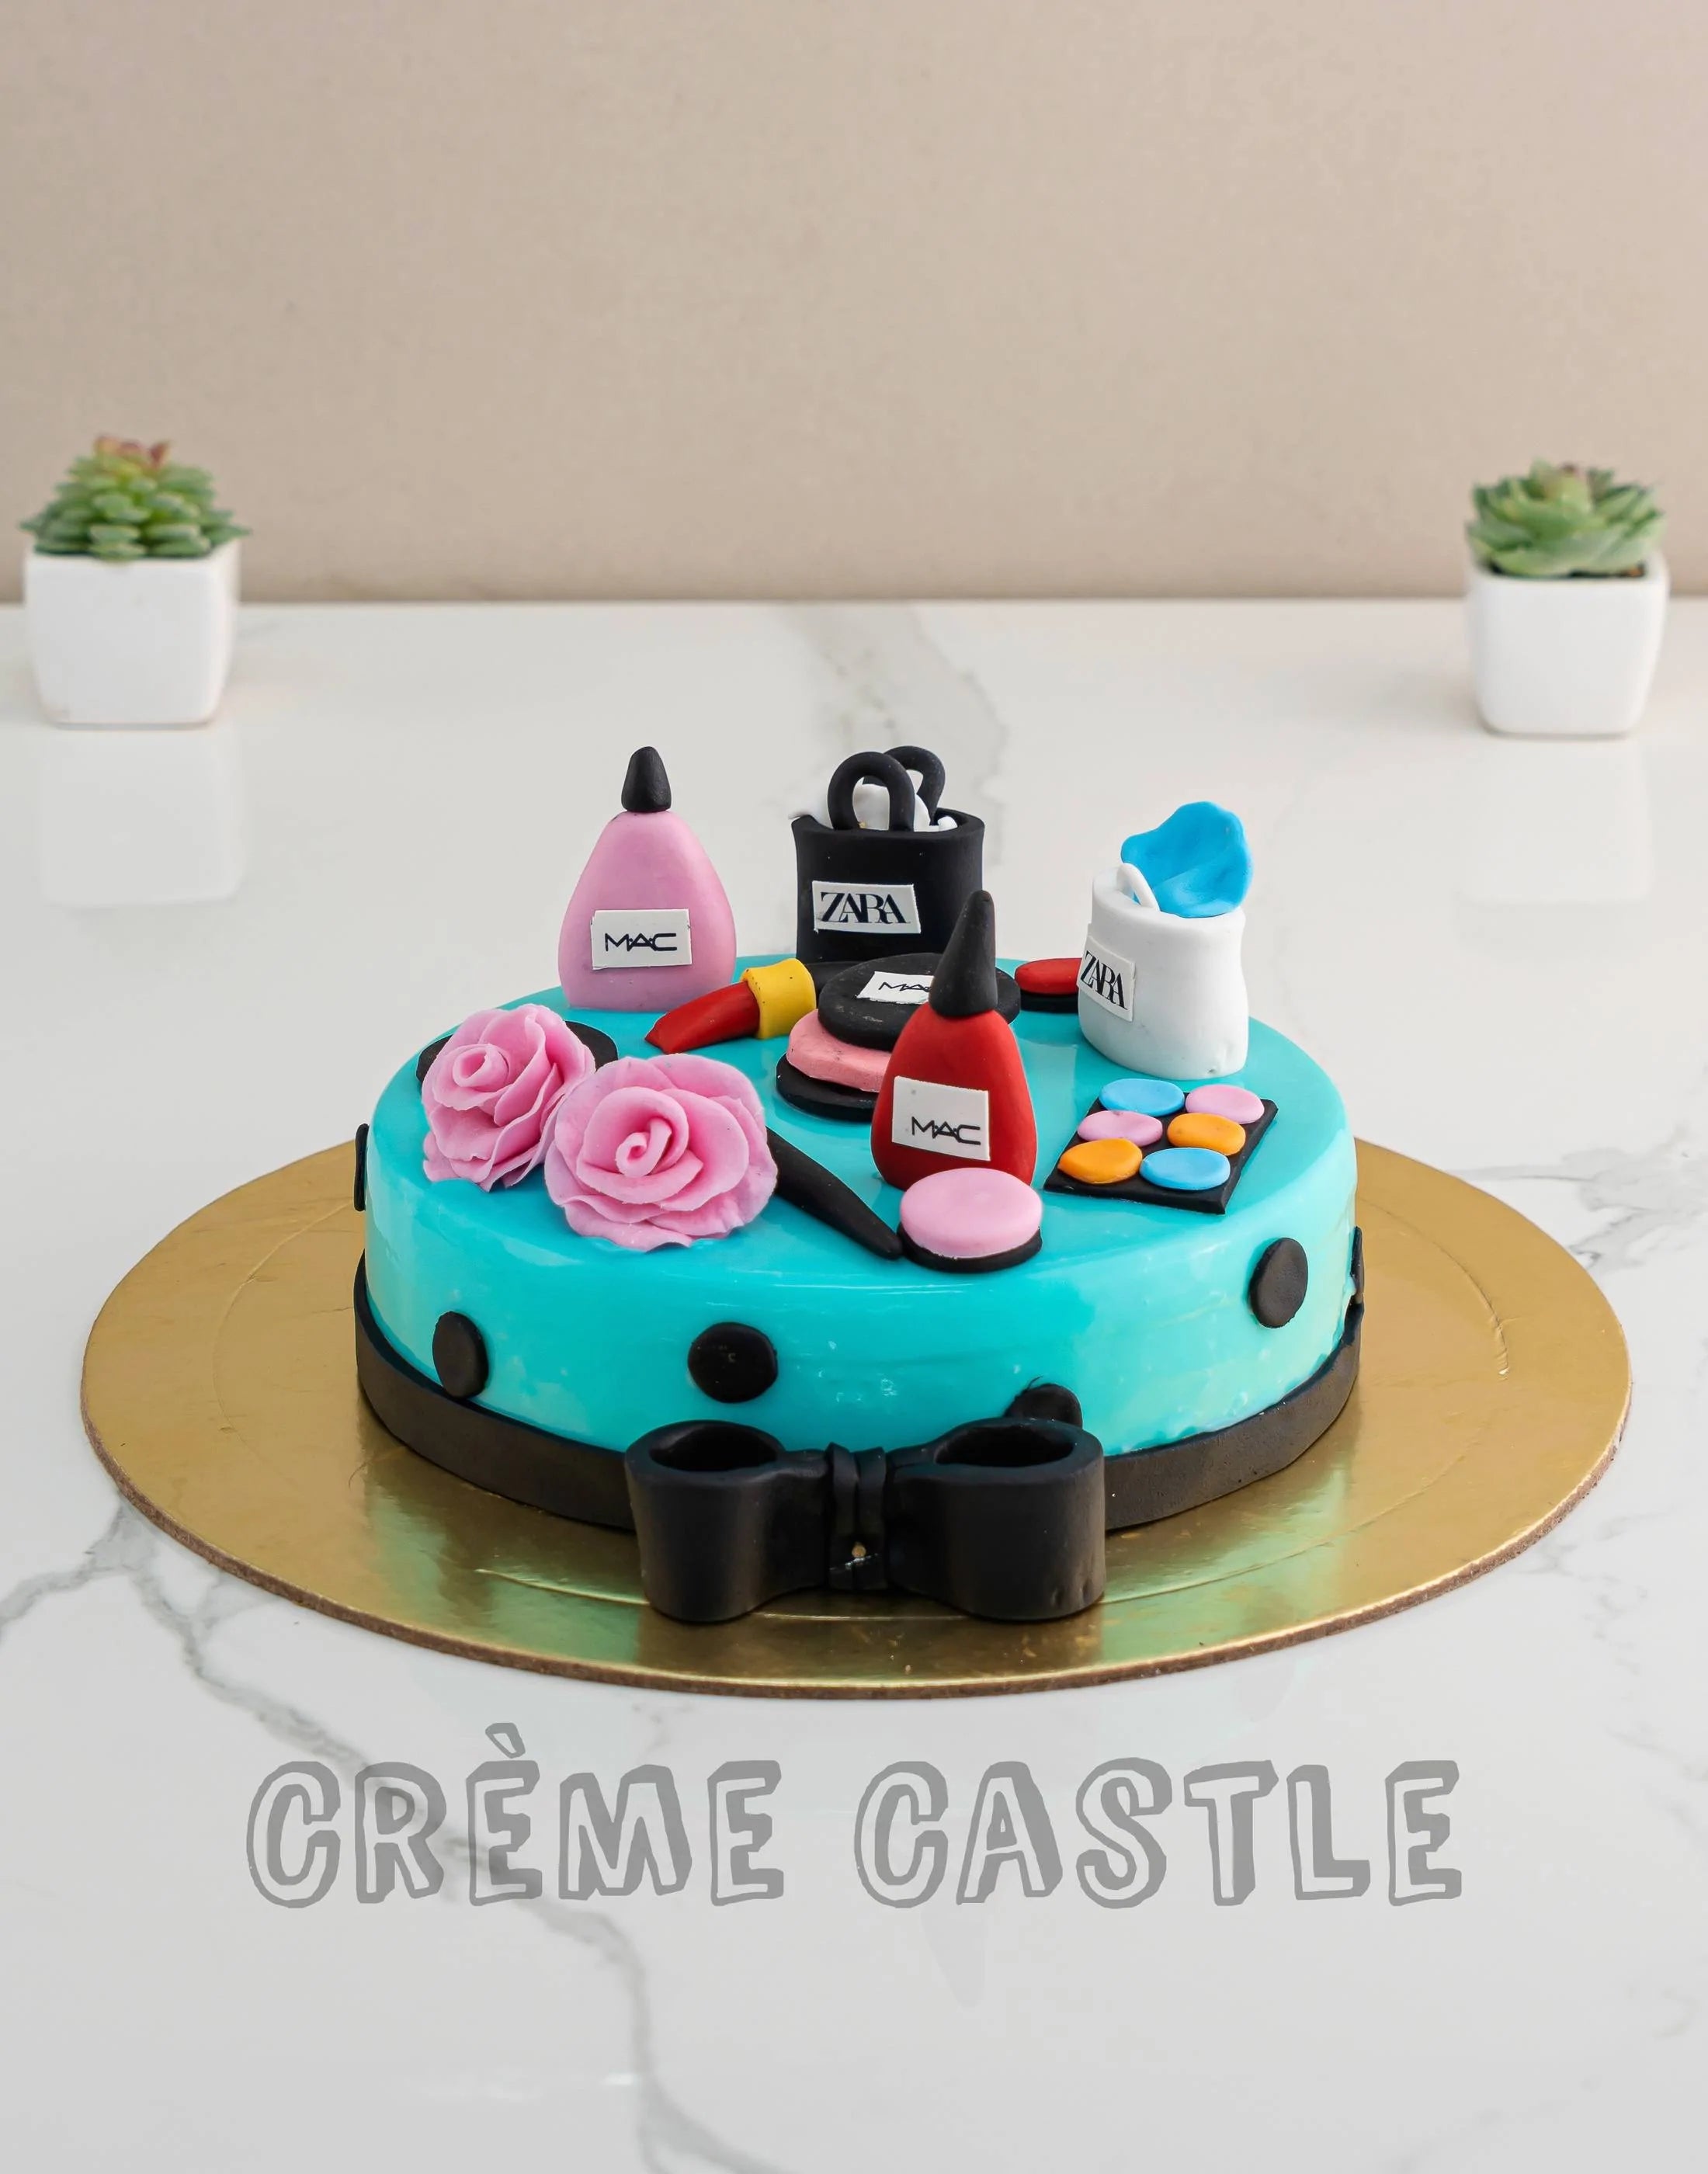 Designer Birthday Cake for Wife | Free Delivery in 3 Hrs | MrCake